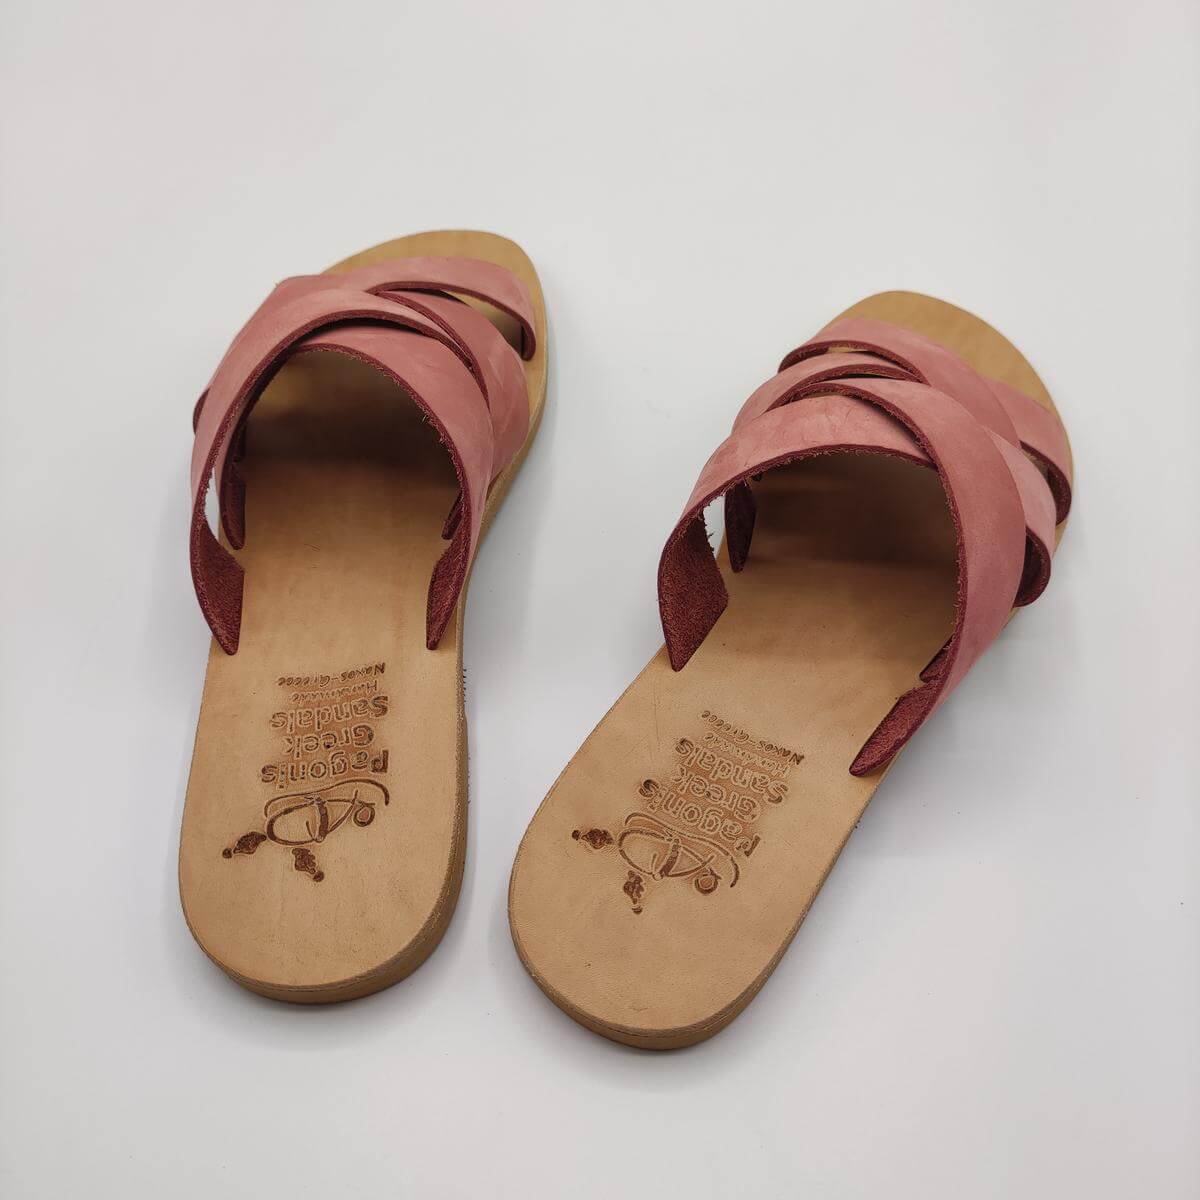 Criss Cross Woven Leather Slides Pagonis Nubuck Pink